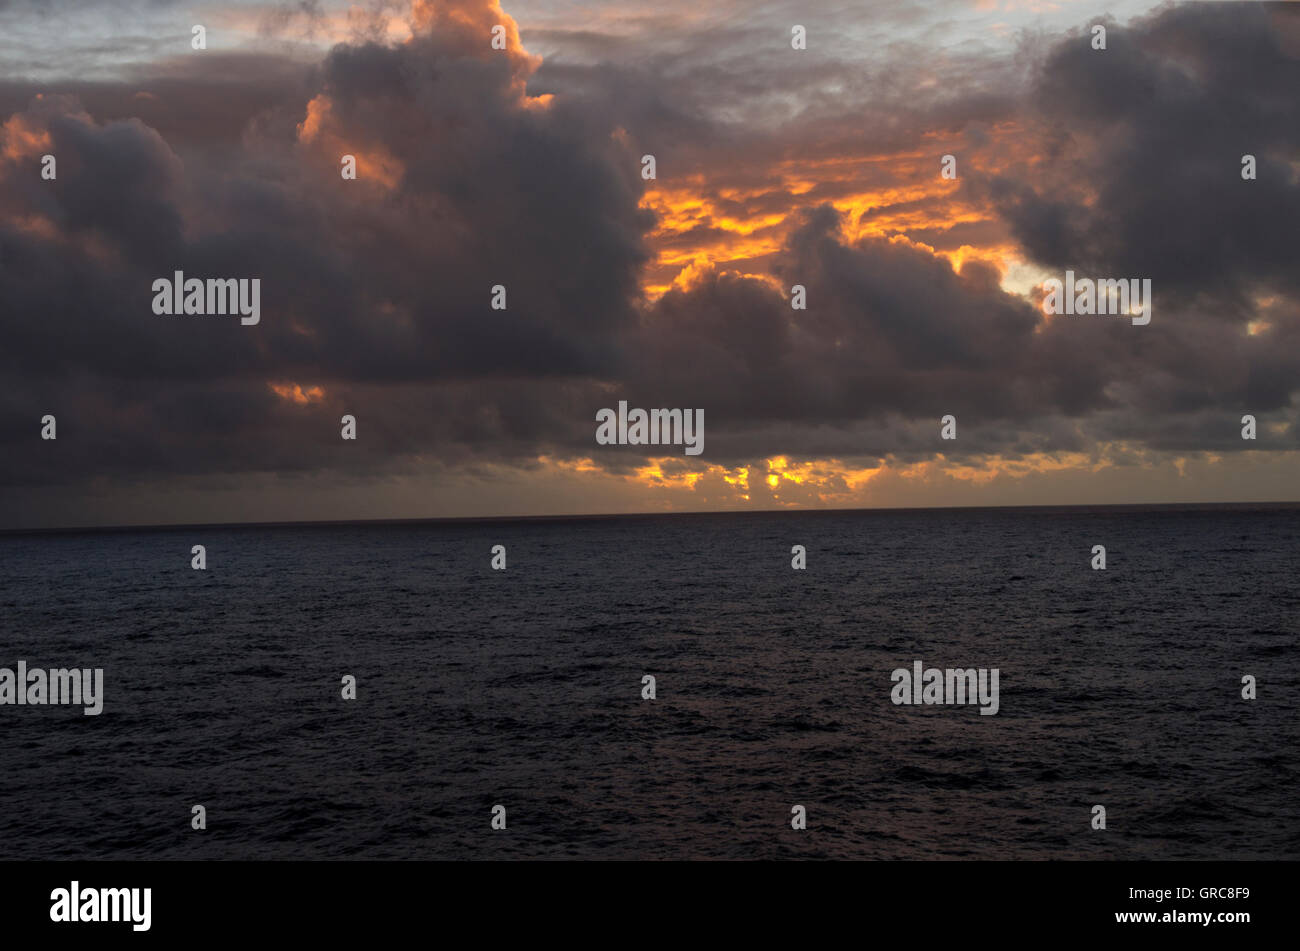 At Sea, ocean and sunset, from cruise ship cabin balcony. Stock Photo